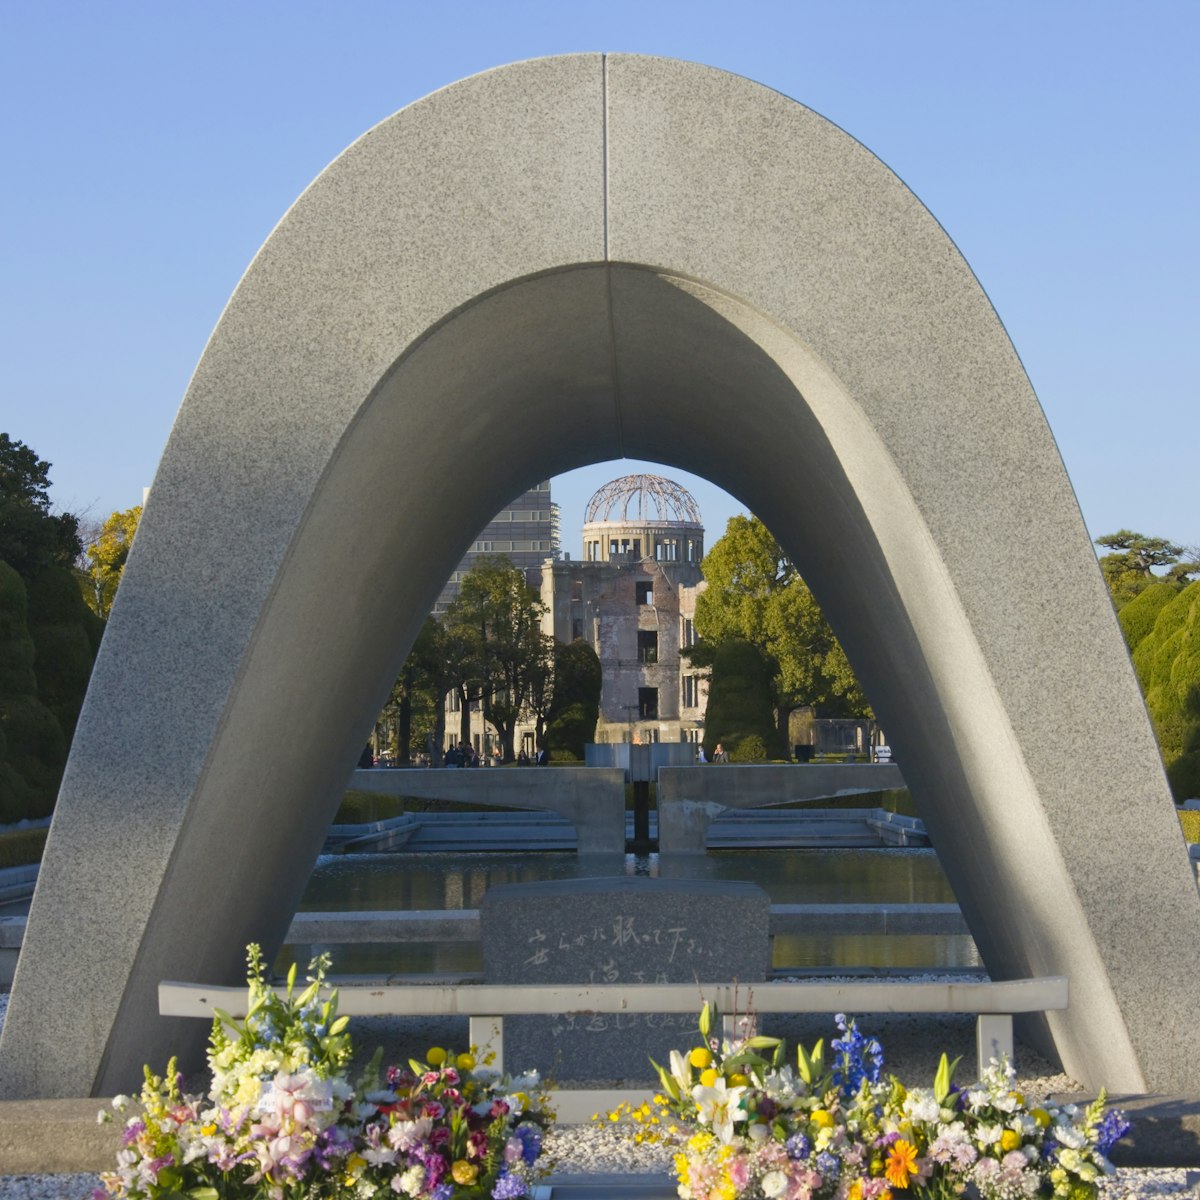 Cenotaph for A-Bomb victims and A-Bomb Dome